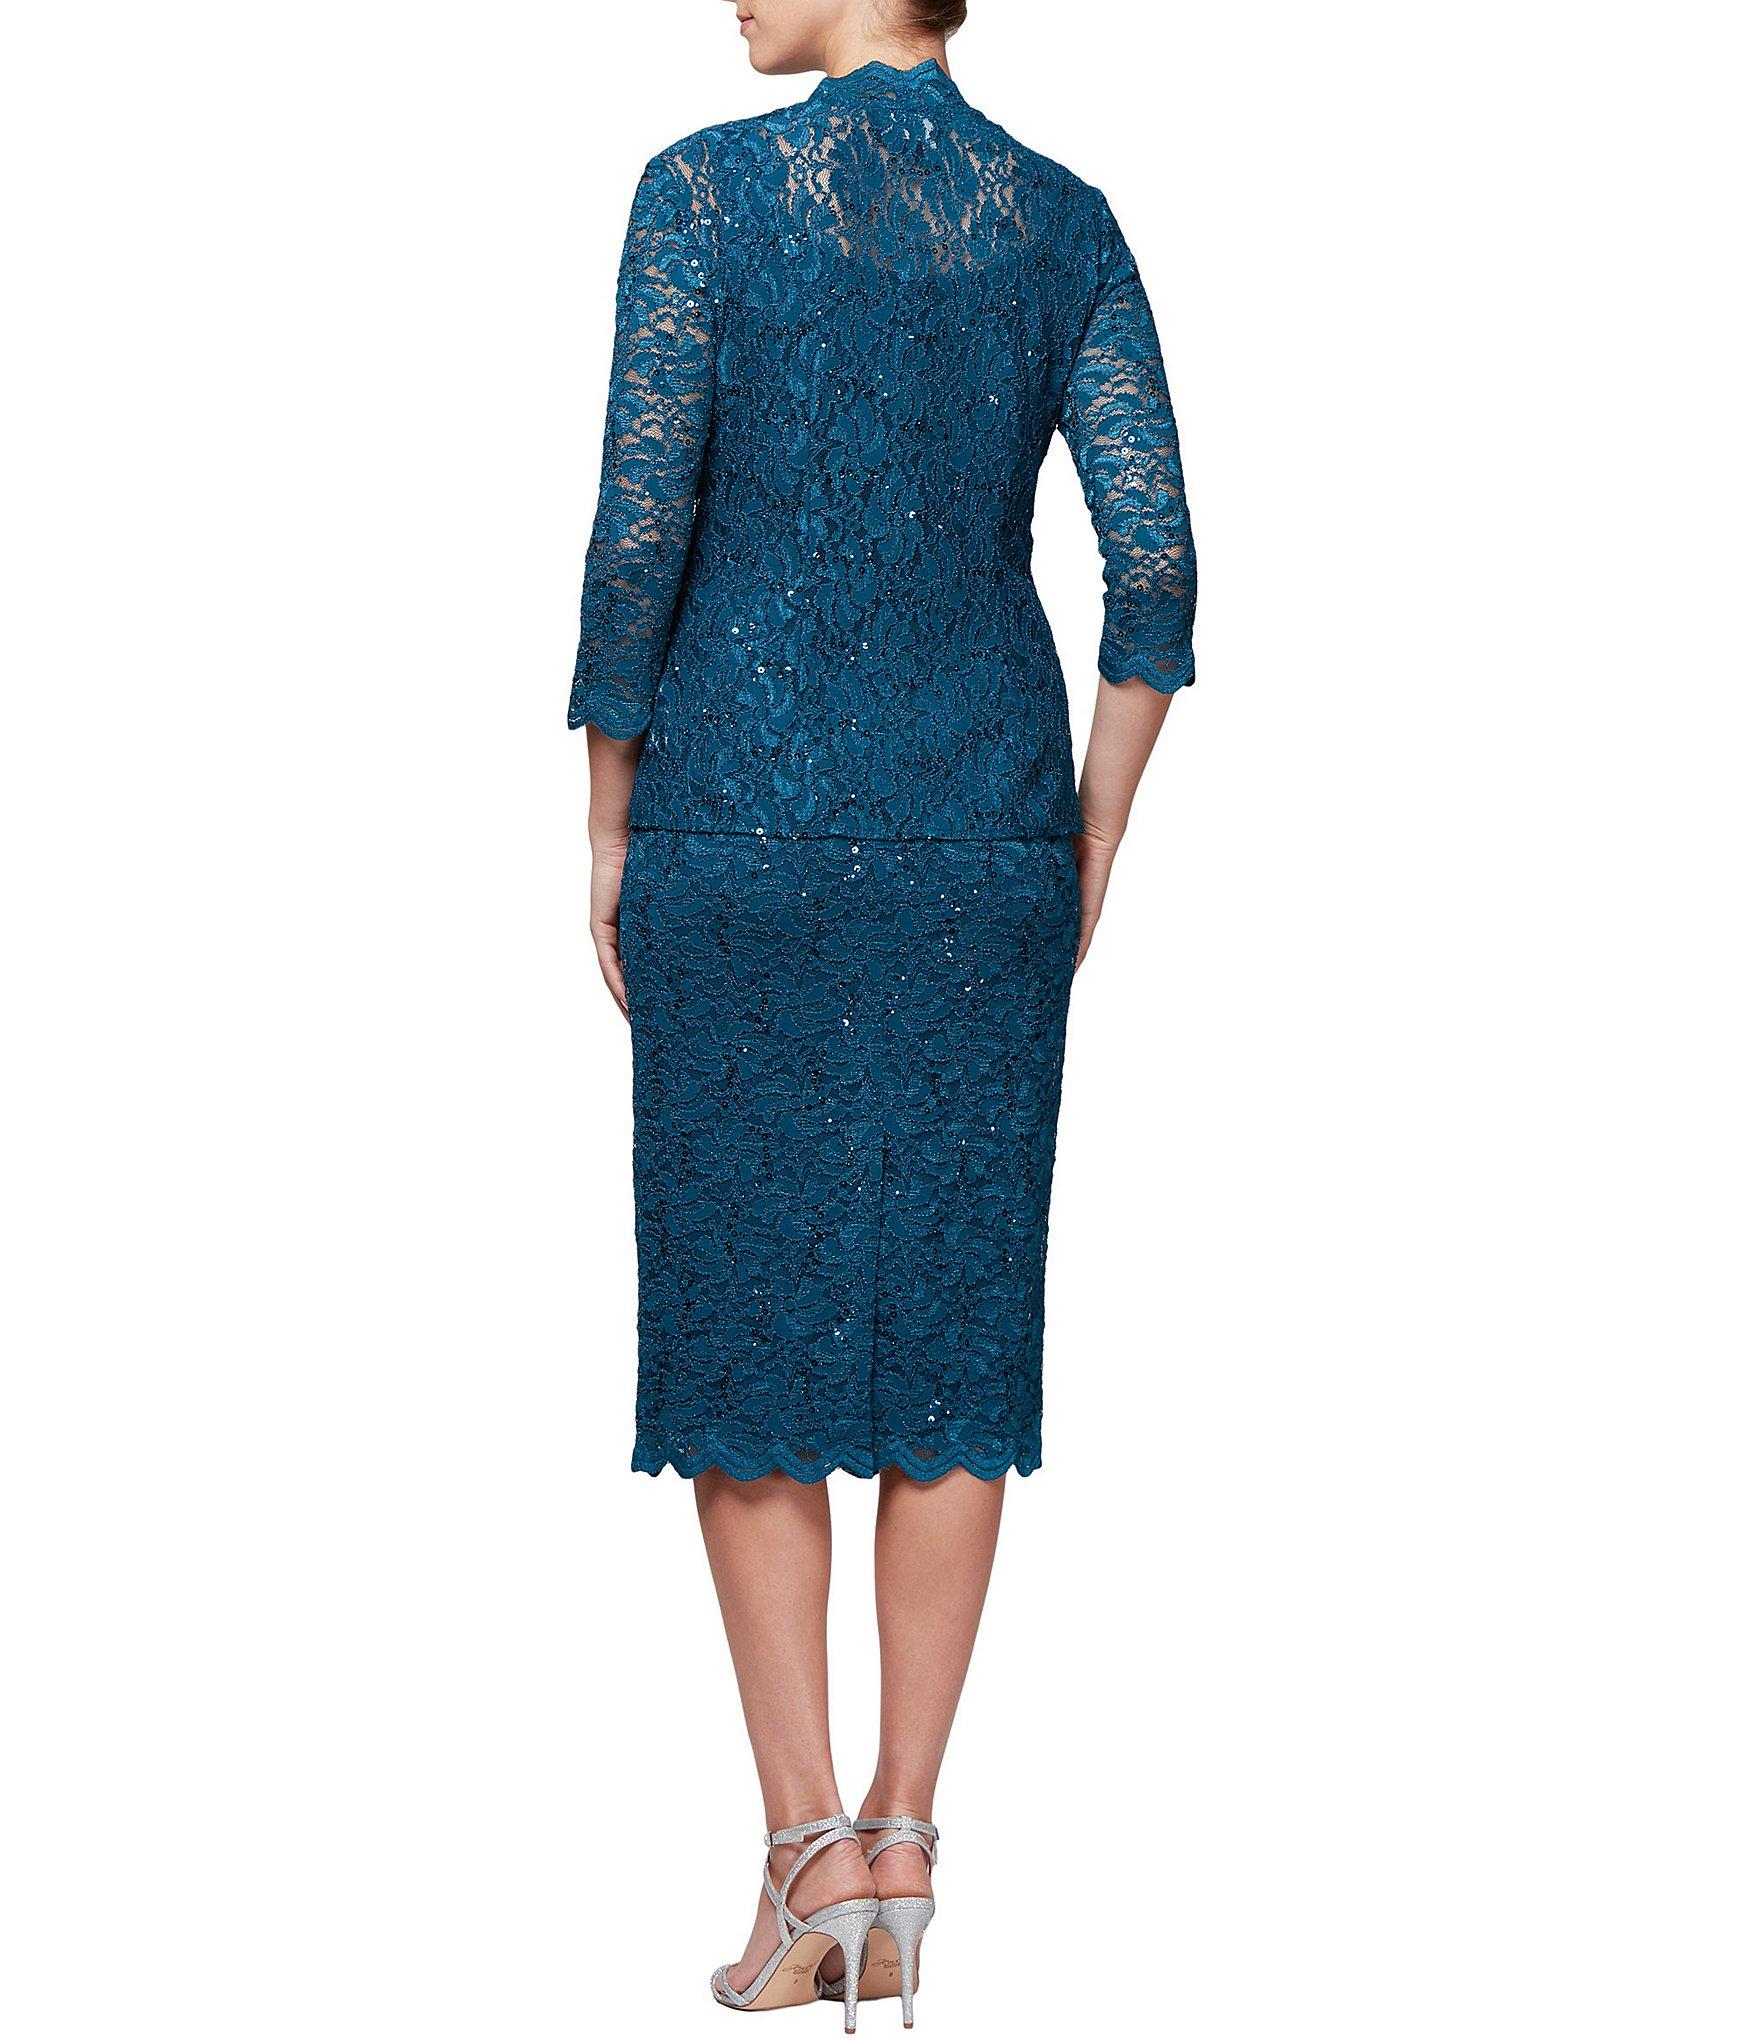 Alex Evenings Petite Sequined Lace Jacket Dress in Blue - Lyst